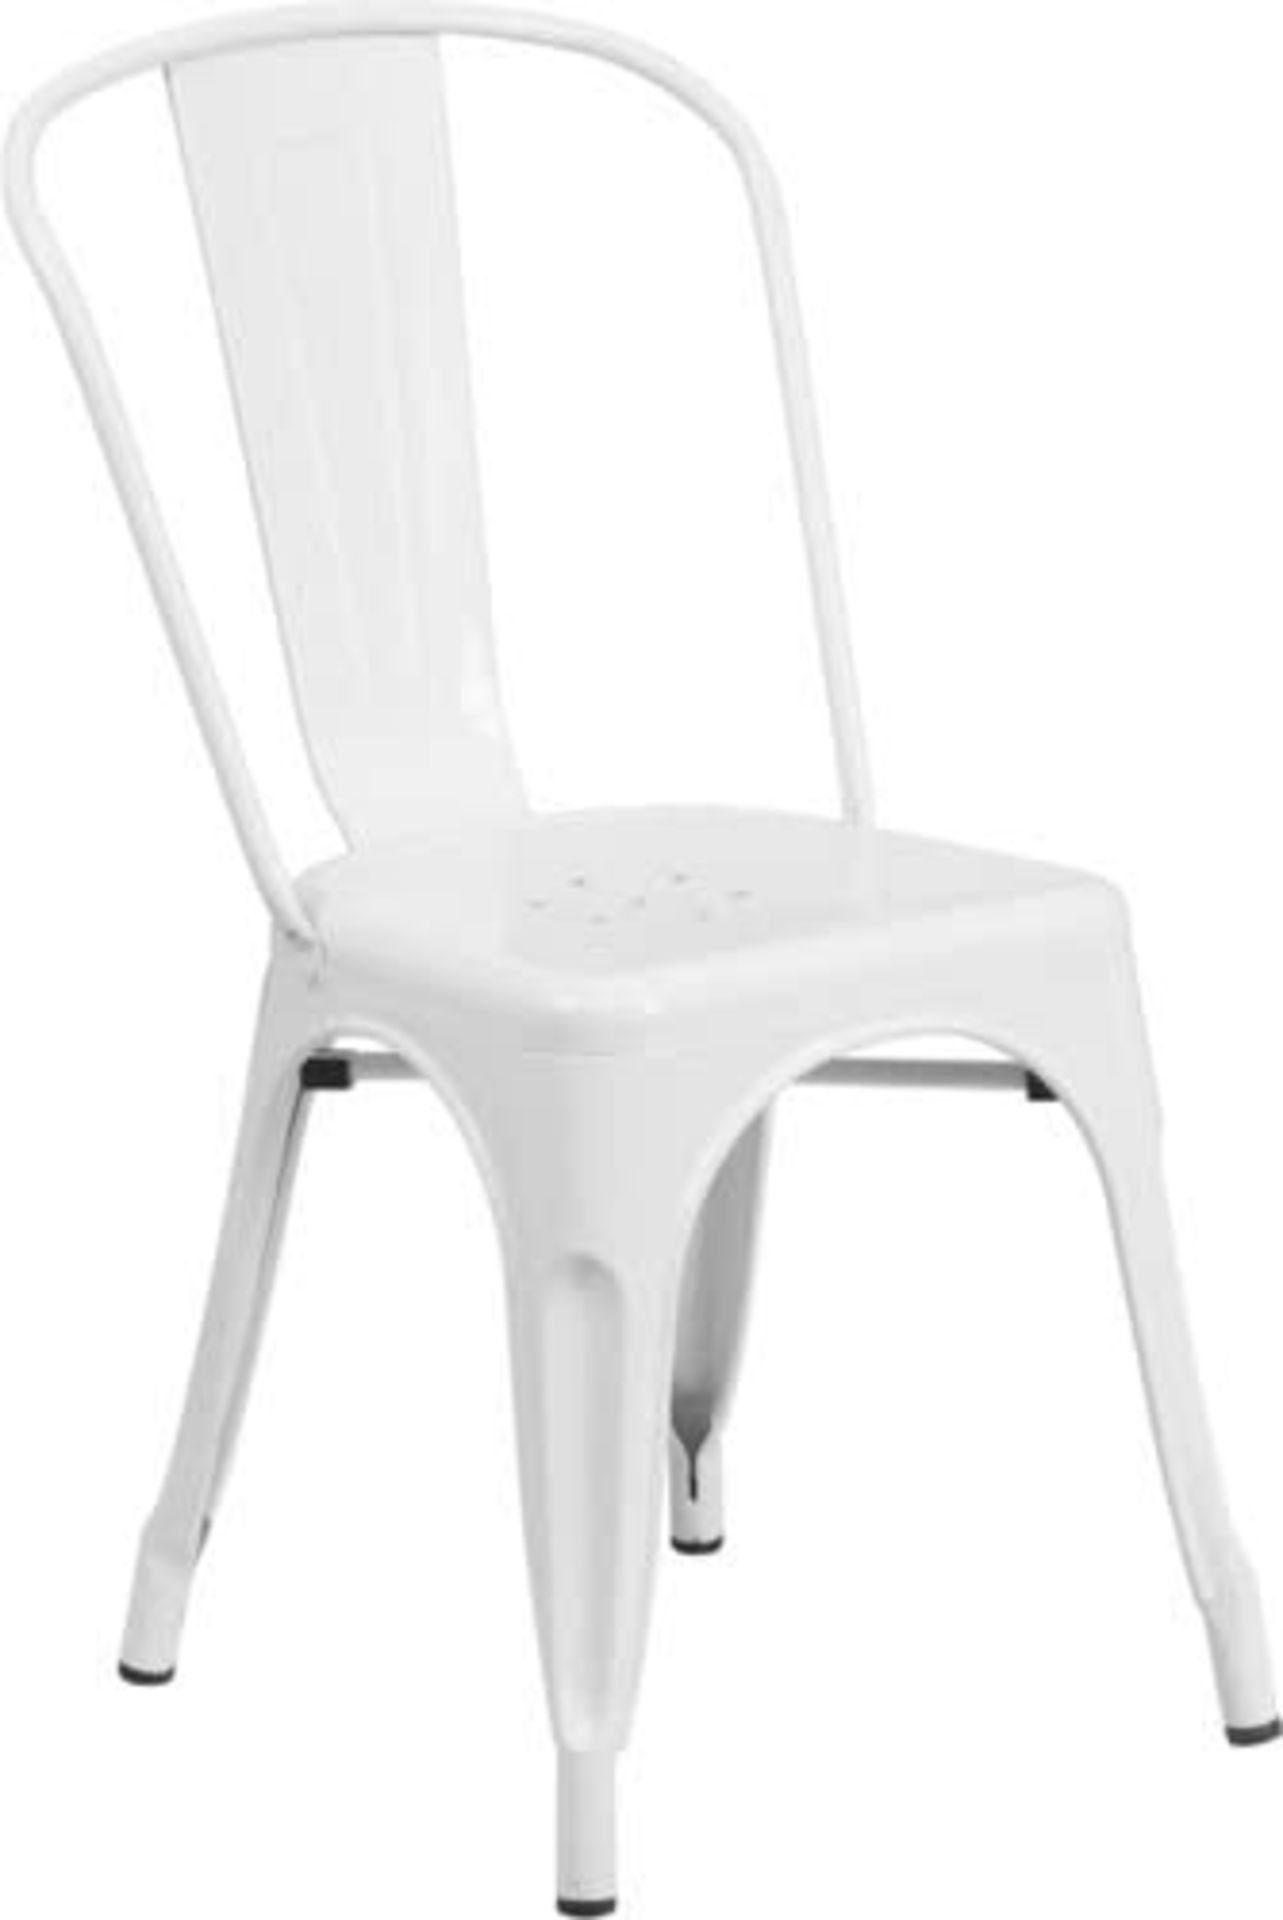 1 x Tolix Industrial Style Outdoor Bistro Table and Chair Set in White- Includes 1 x Table and 4 x - Image 2 of 14